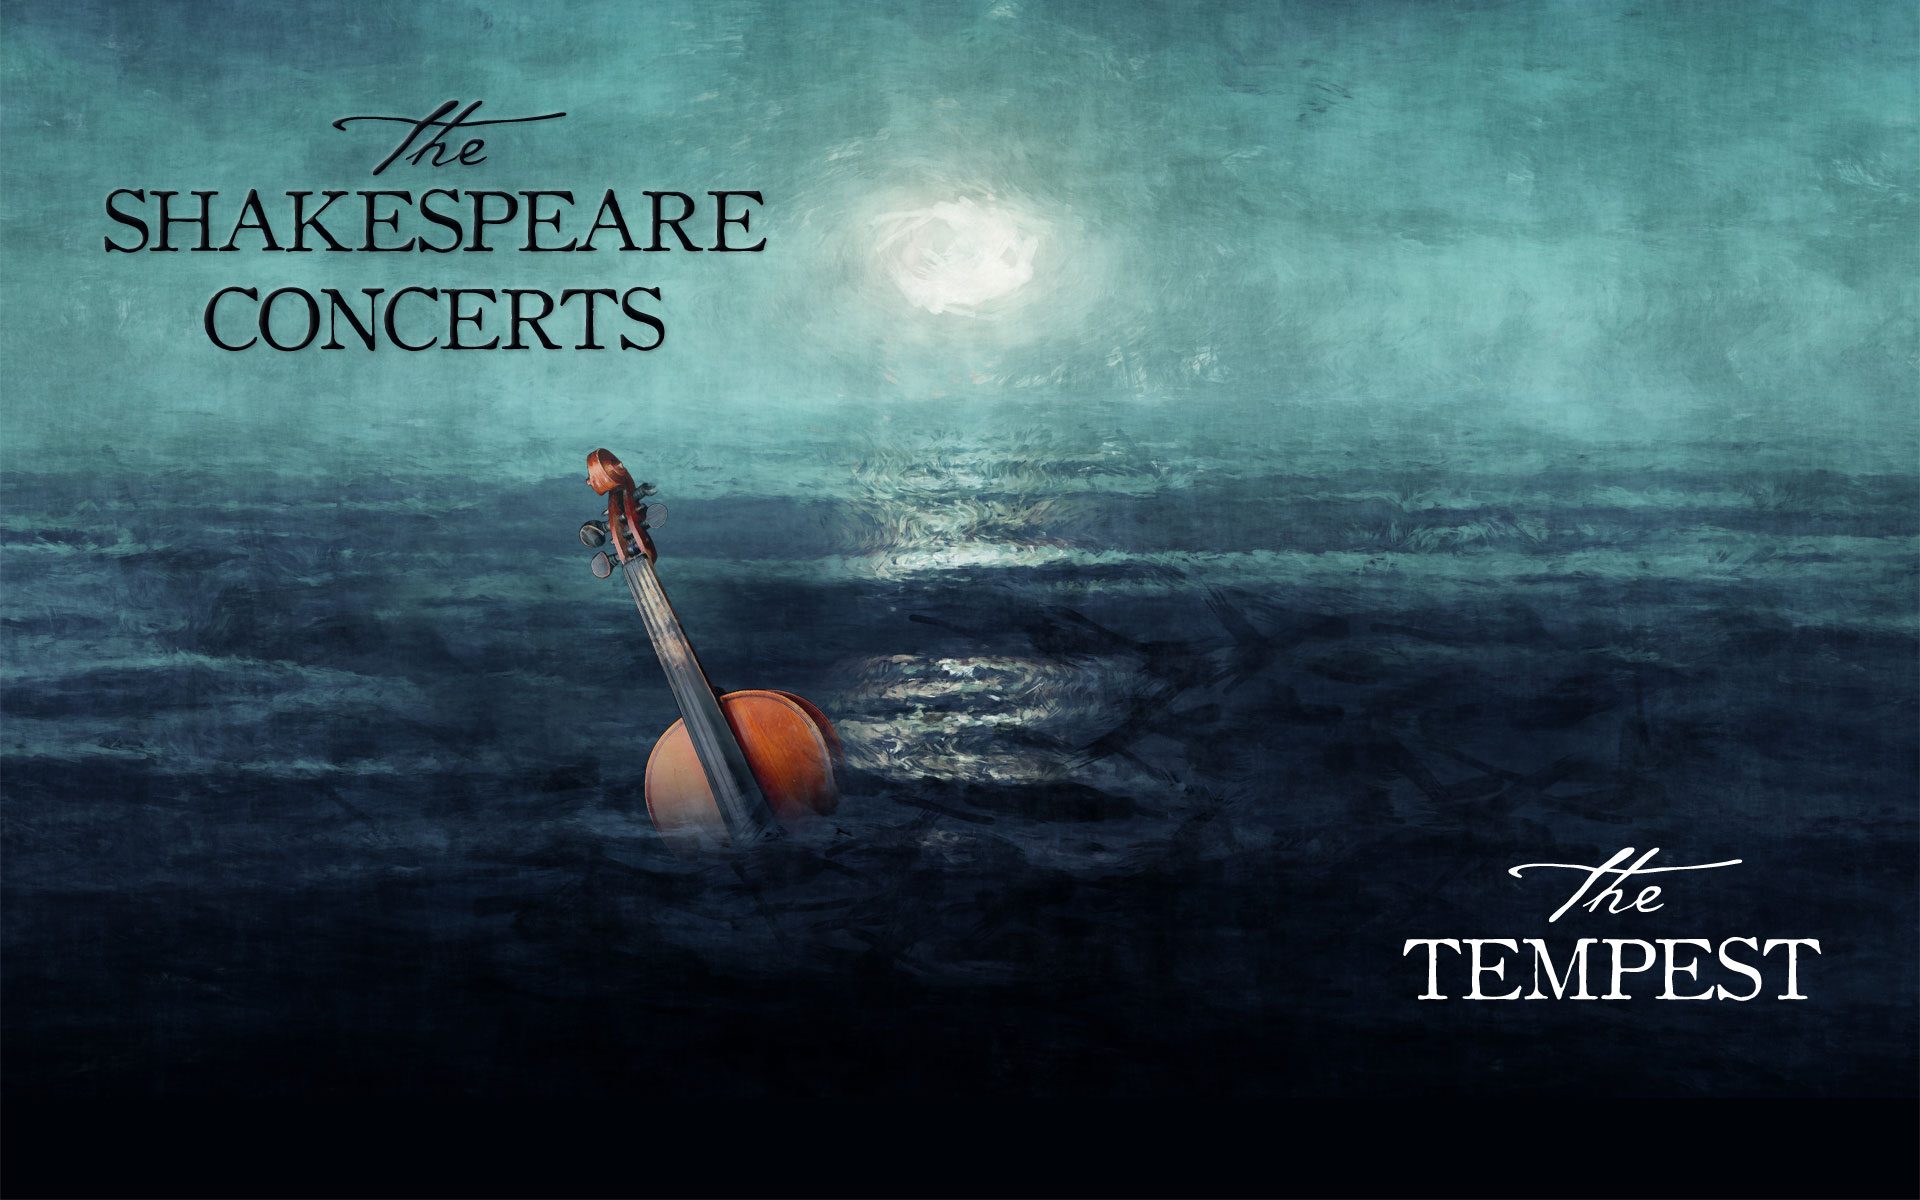 The Tempest, The Shakespeare Concerts, Joseph Summer - Tempest Shakespeare , HD Wallpaper & Backgrounds